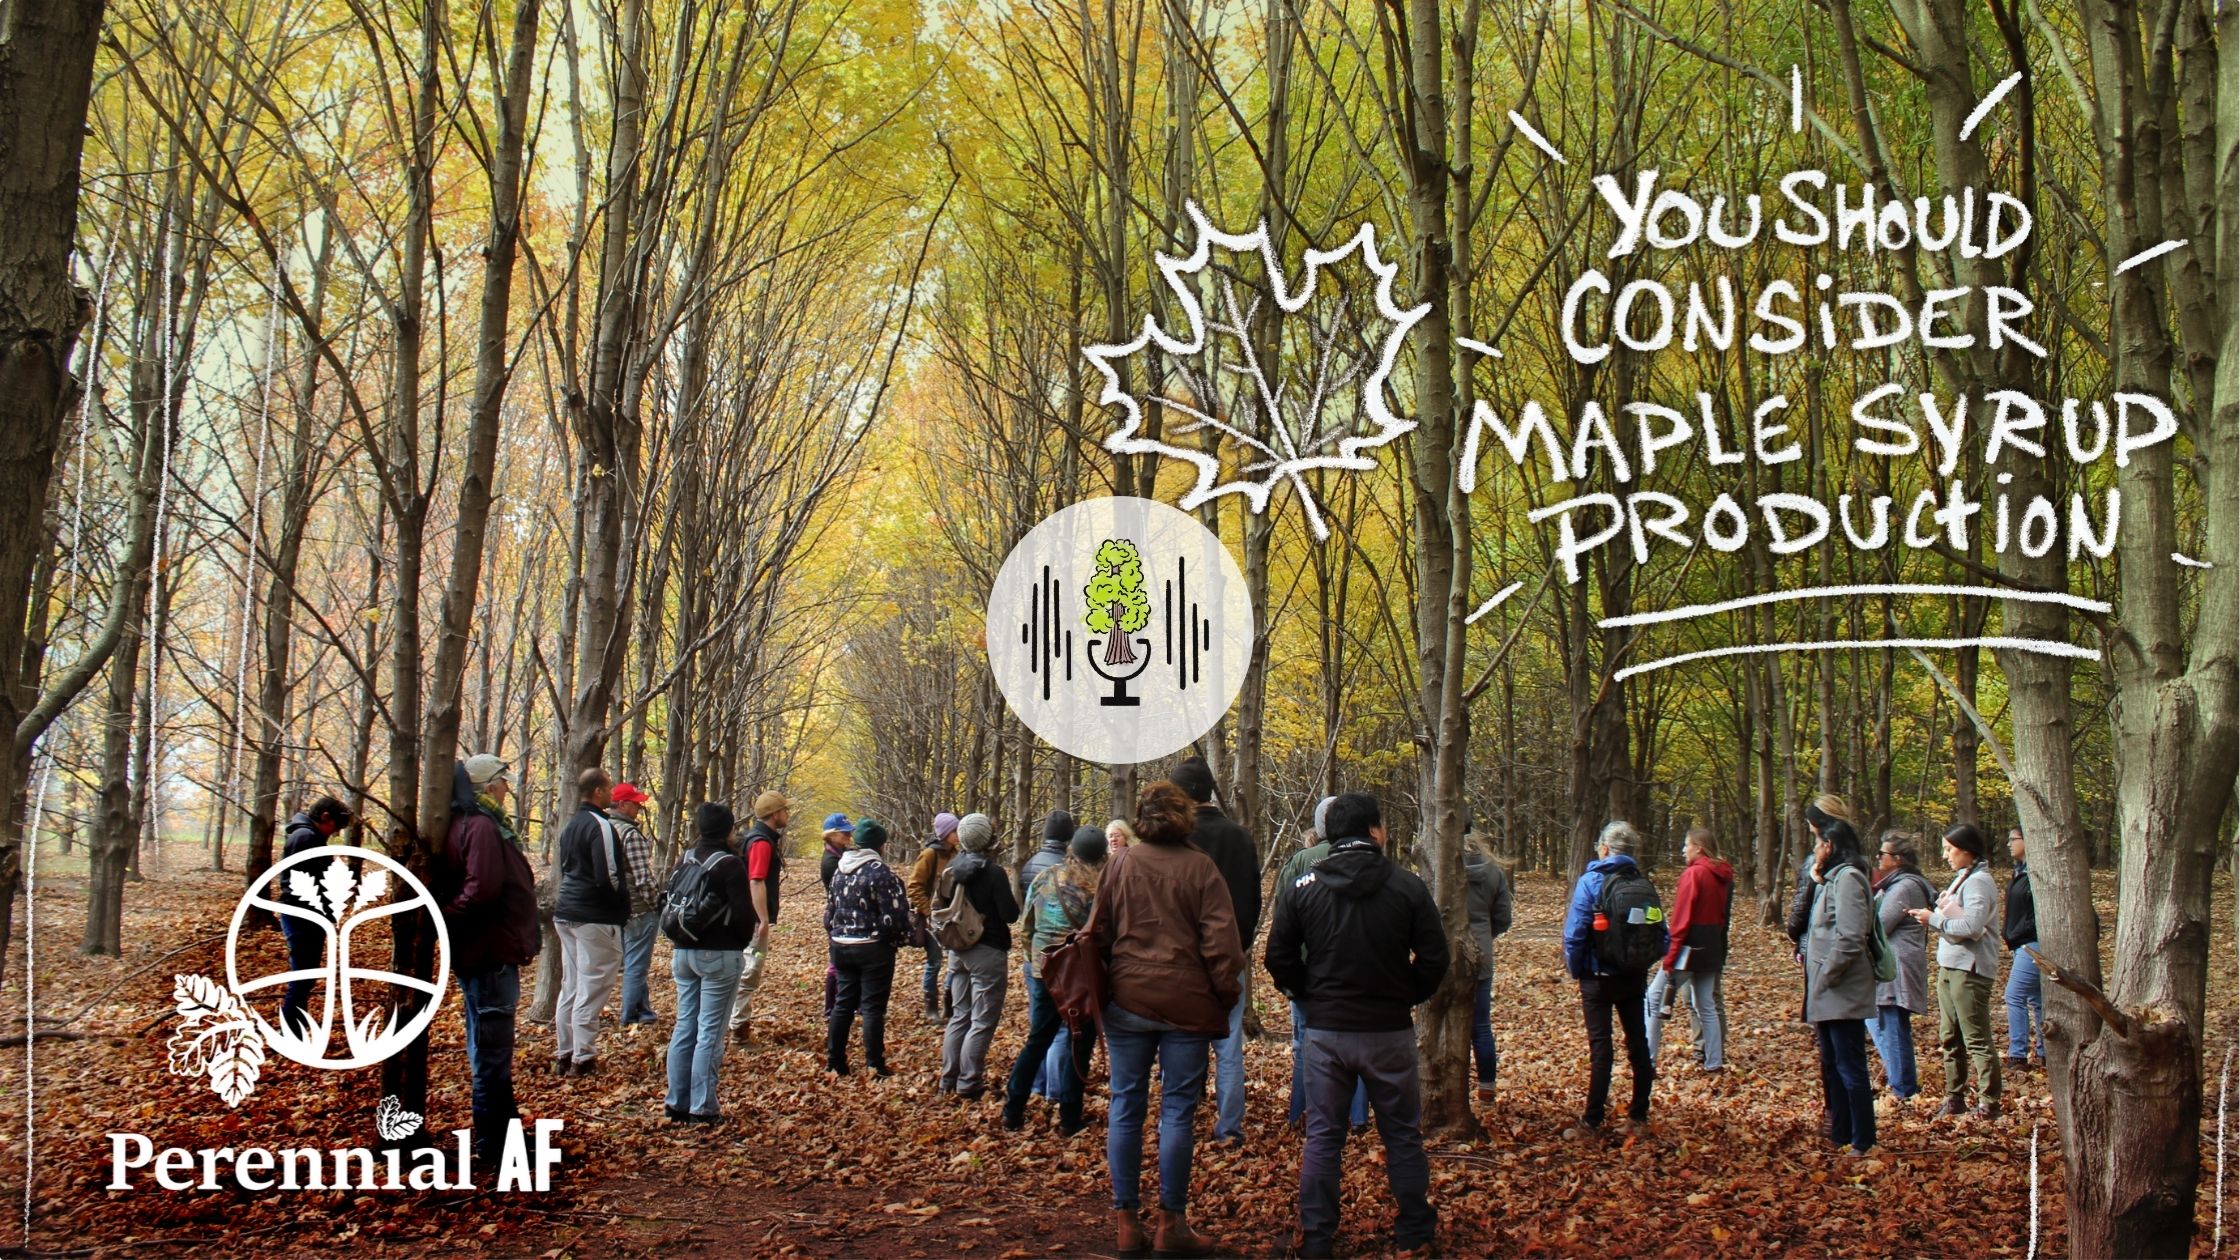 People touring a maple tree grove.